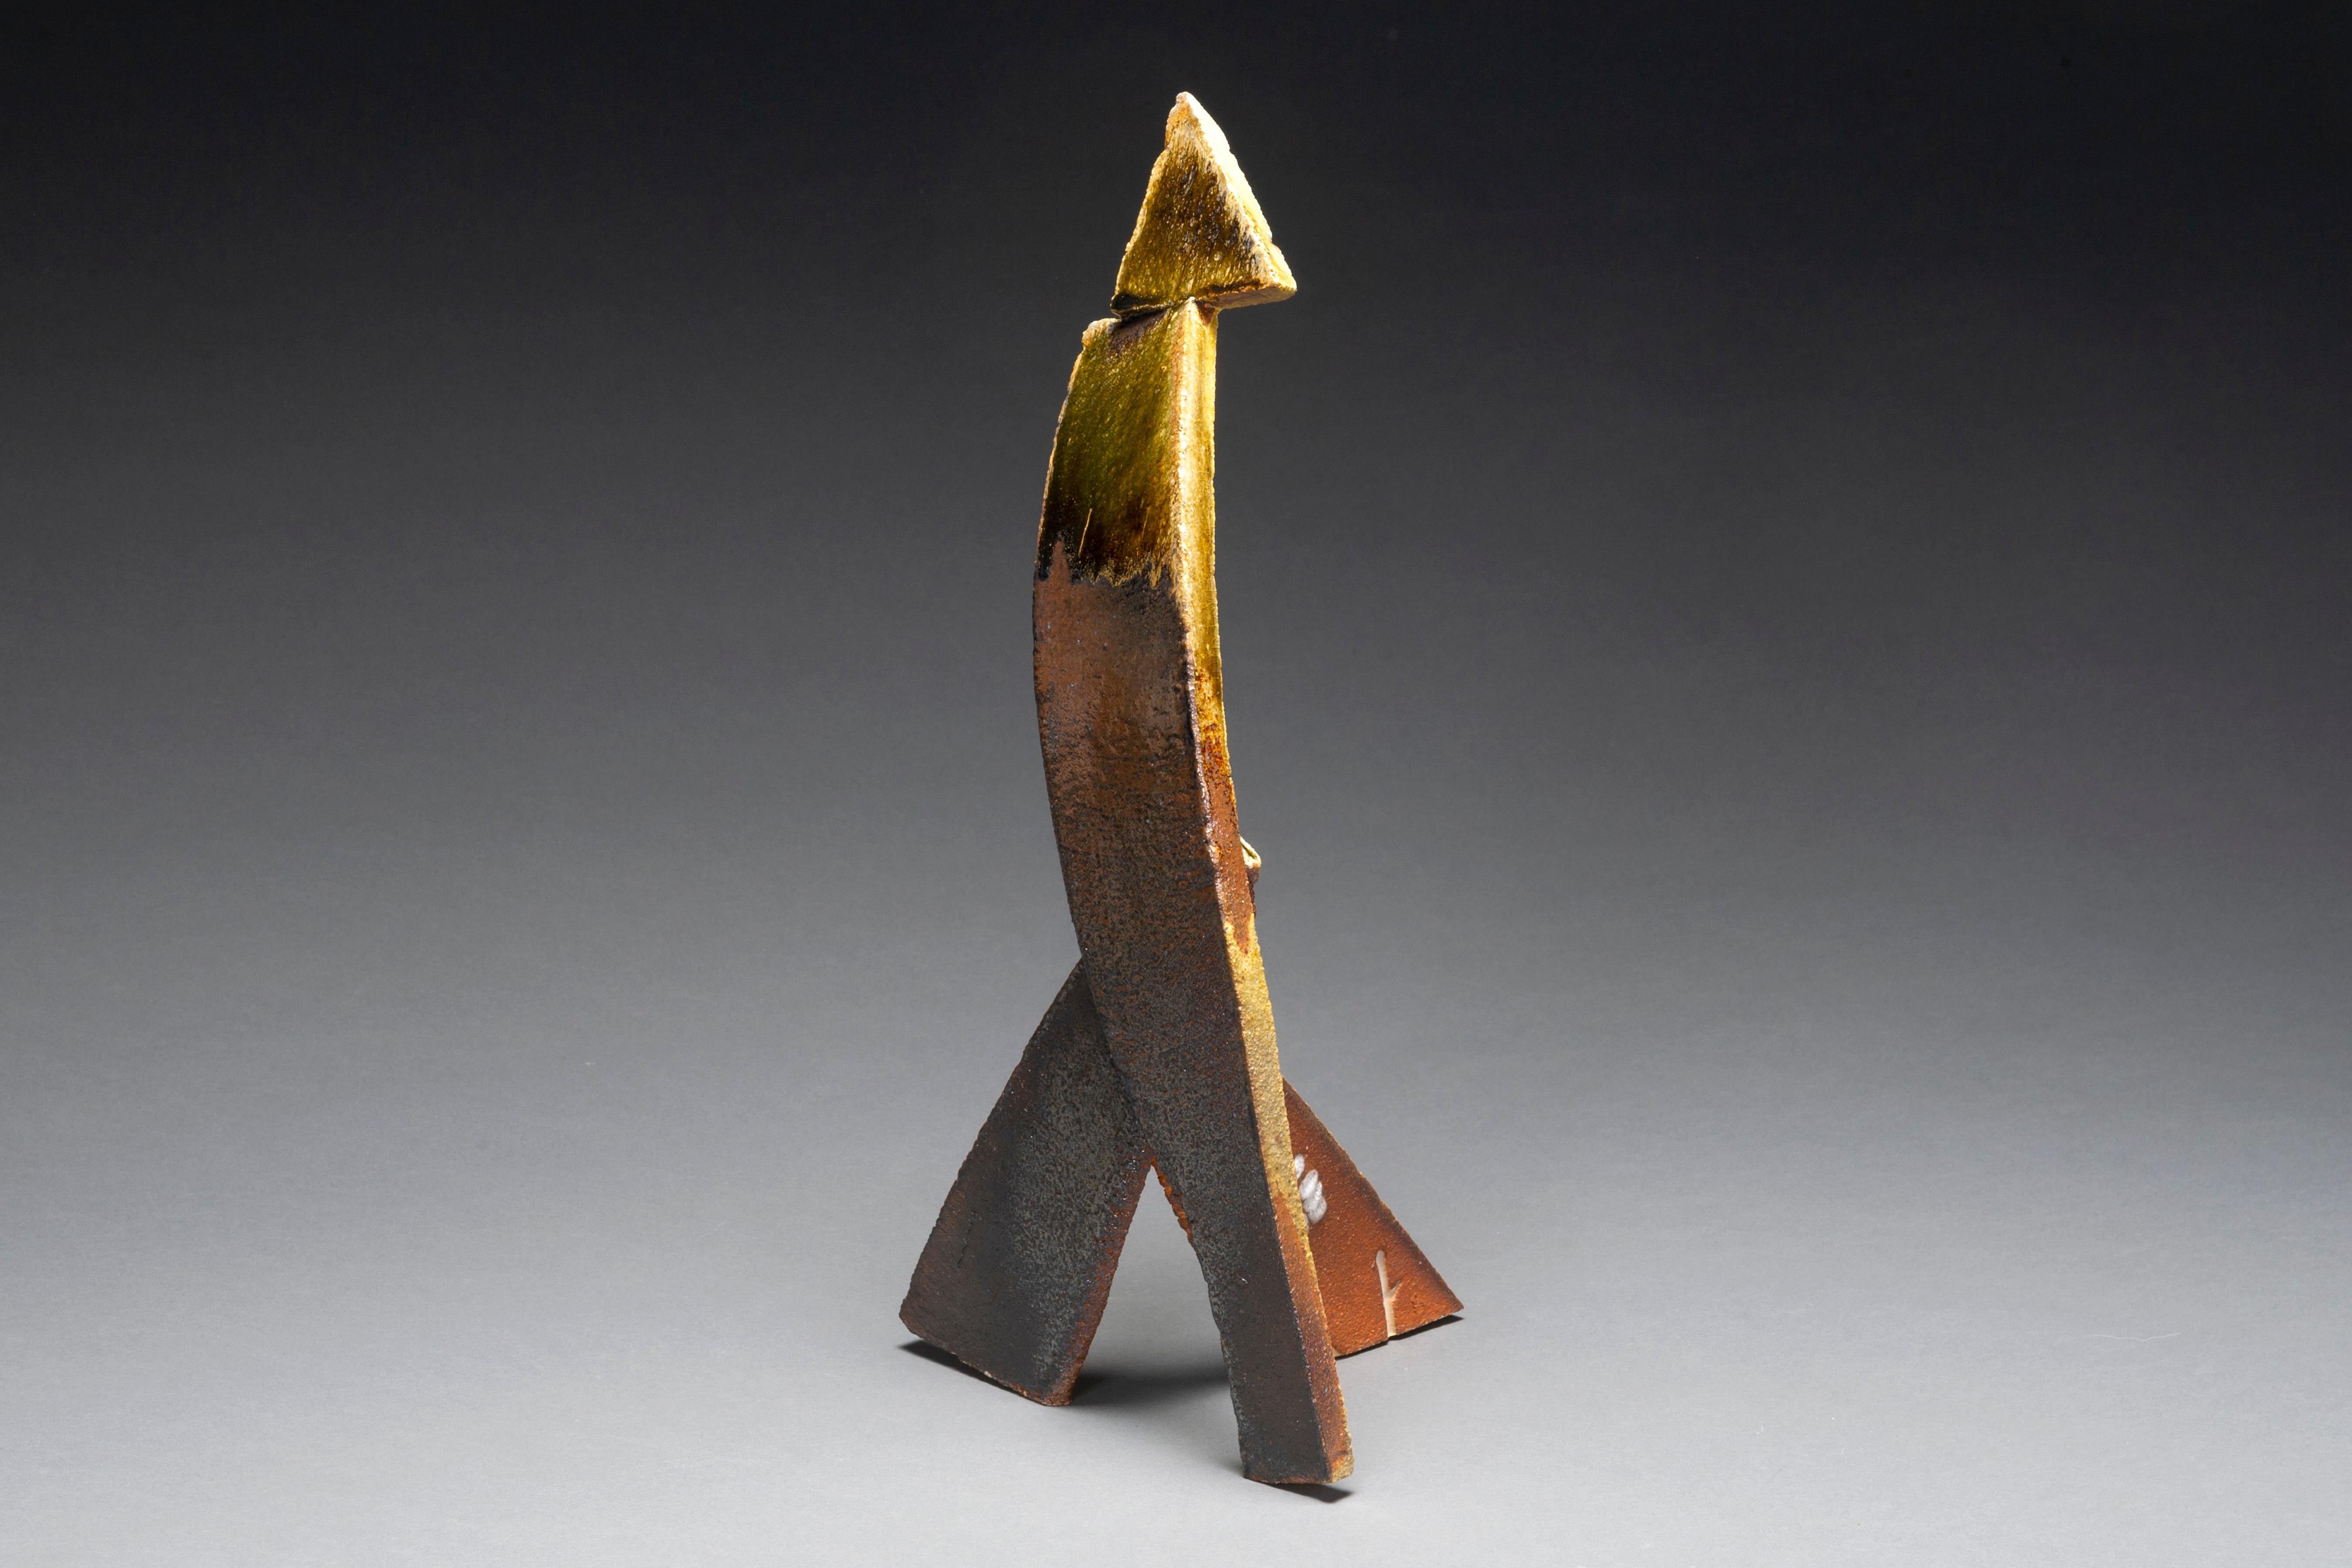 Wood-fired ceramic abstract sculpture: 'Walker' - Contemporary Sculpture by Tony Moore